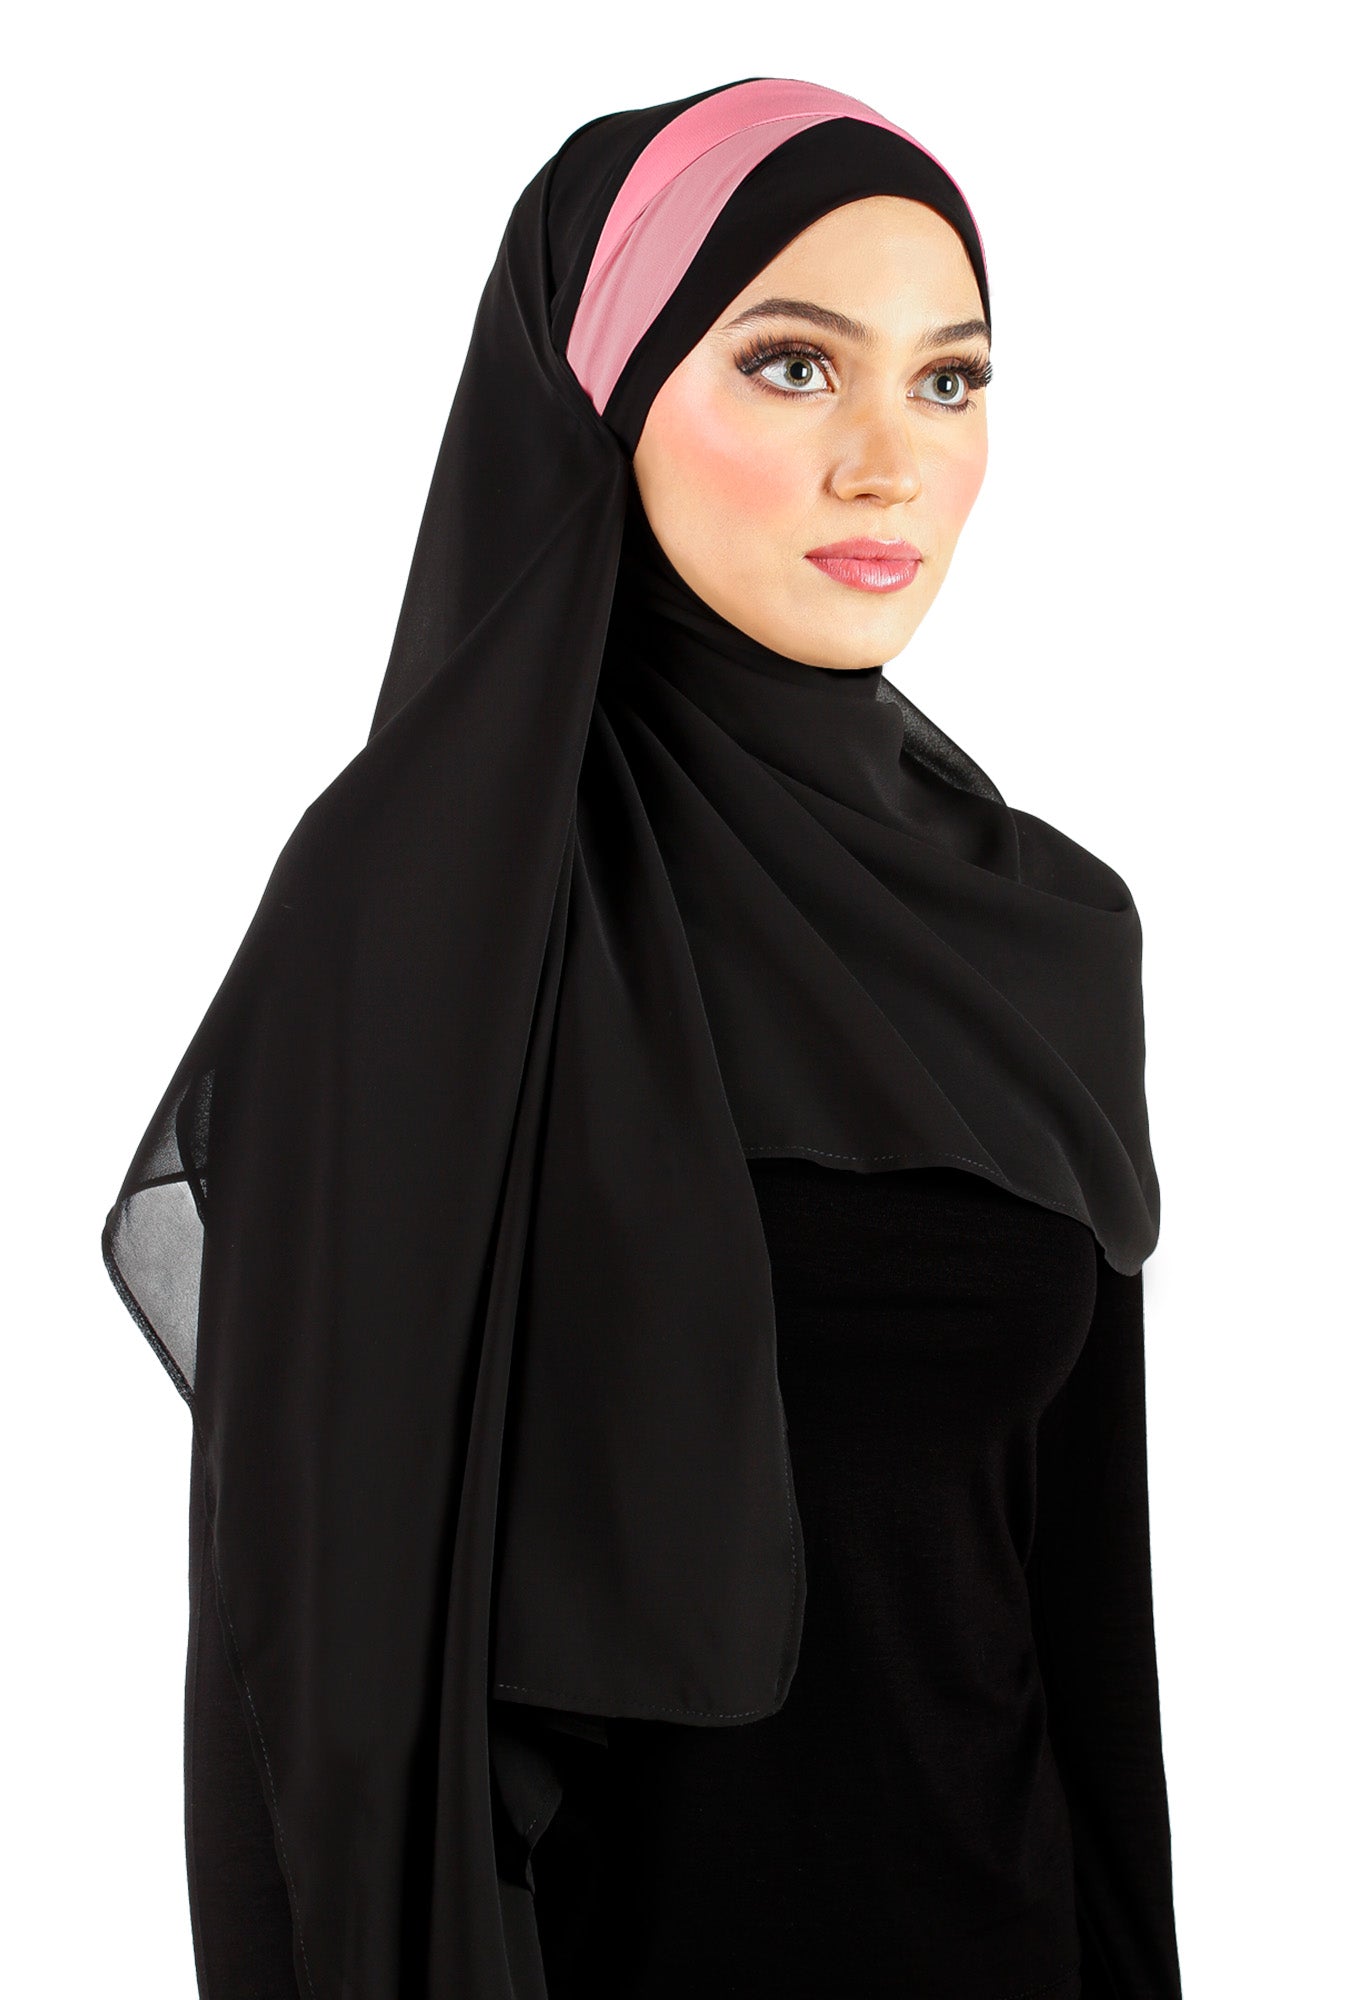 rose pink accent stripe on the black korean fabric hijab wrap has 2 tie back sashes that secure the hijab